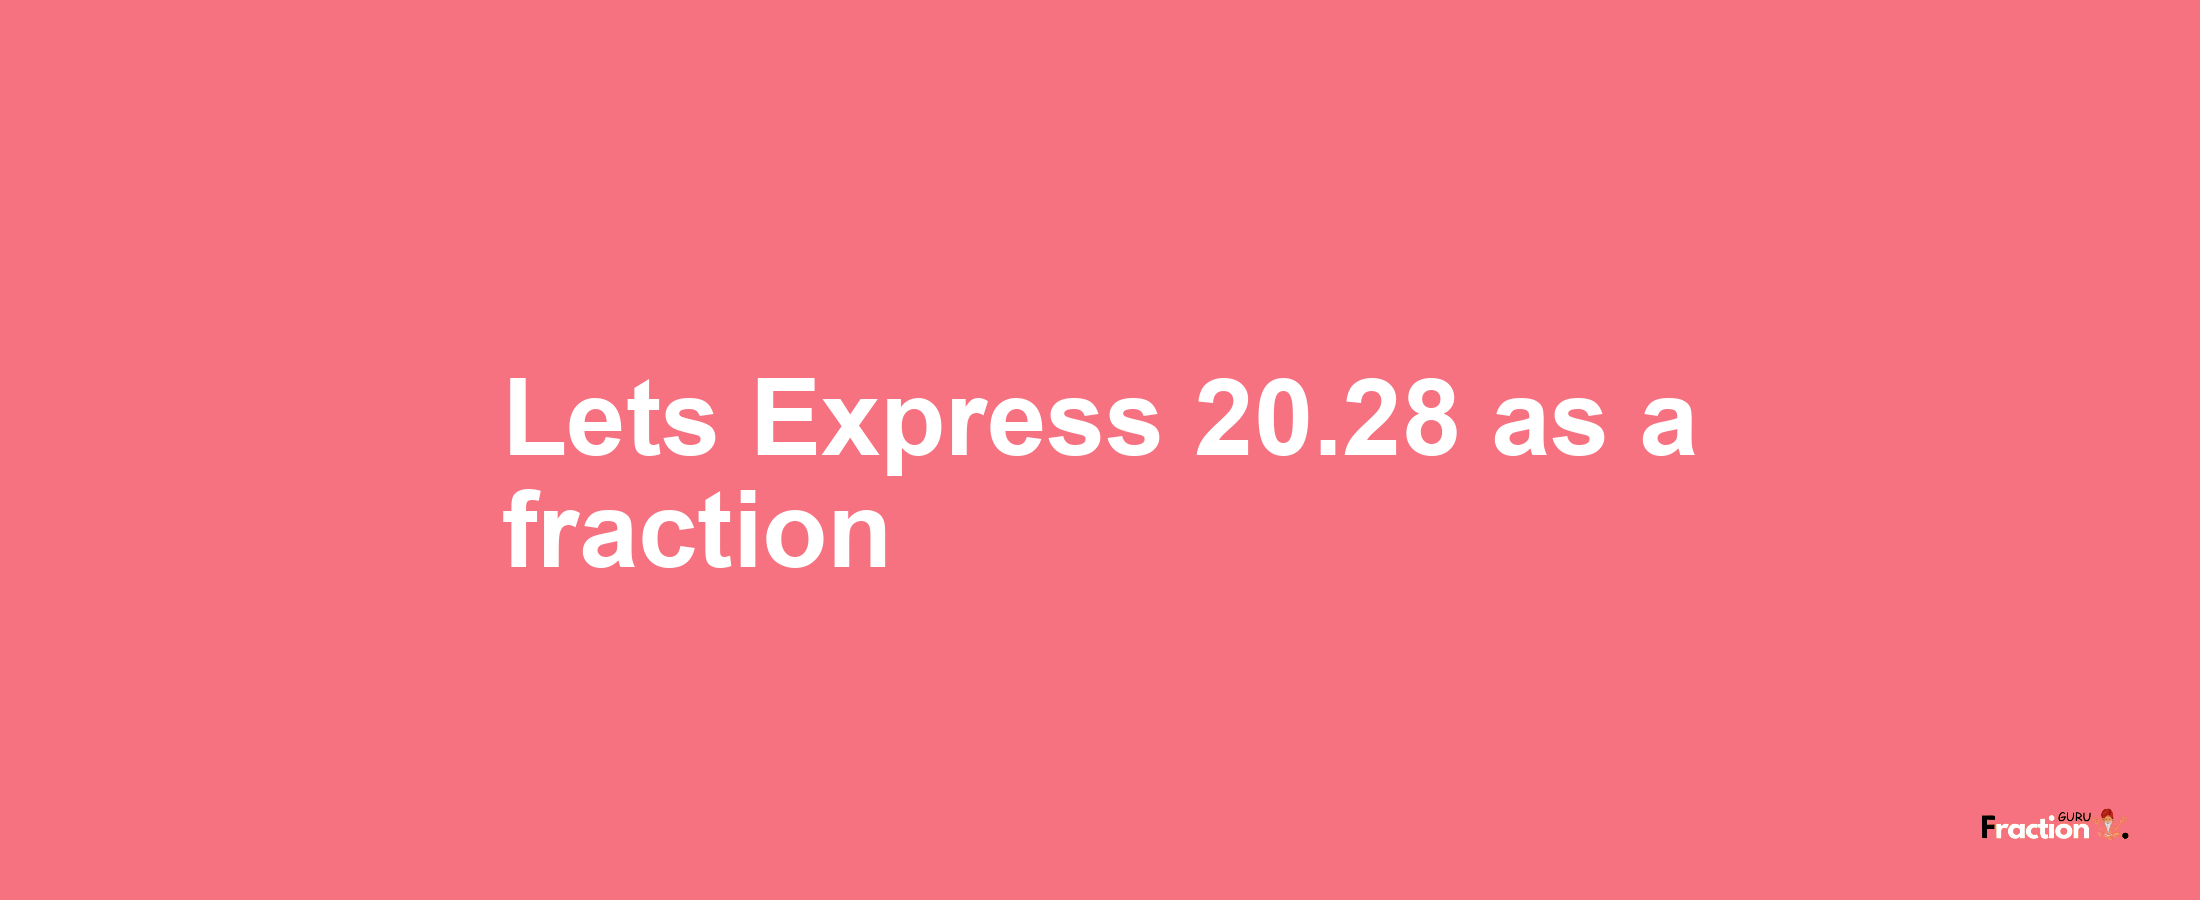 Lets Express 20.28 as afraction